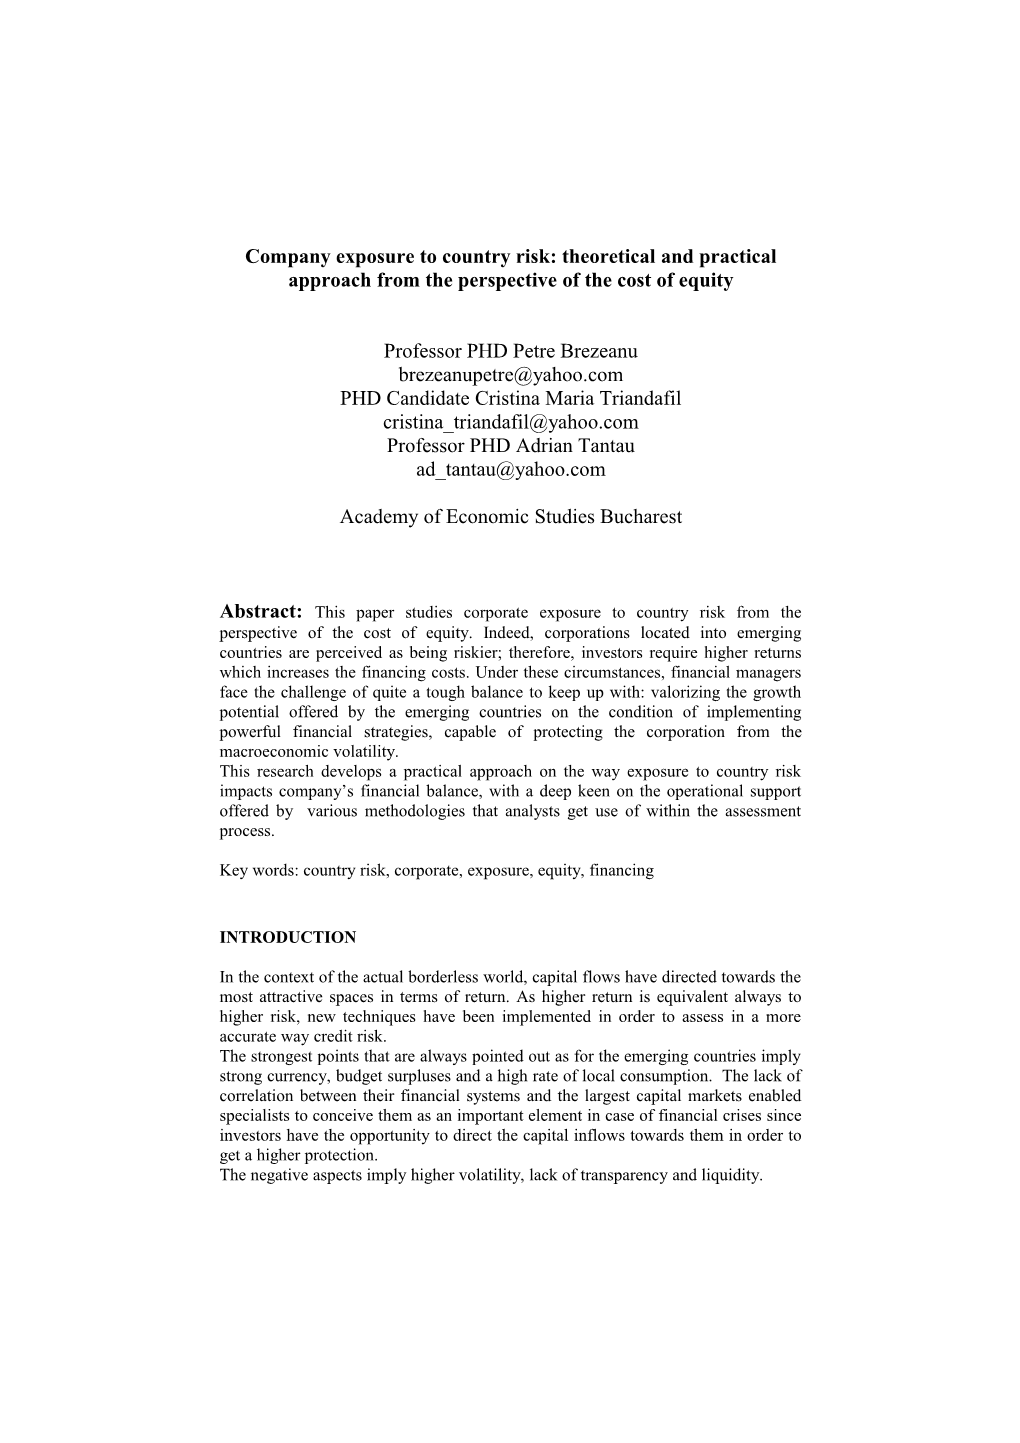 Company Exposure to Country Risk: Theoretical and Practical Approach from the Perspective